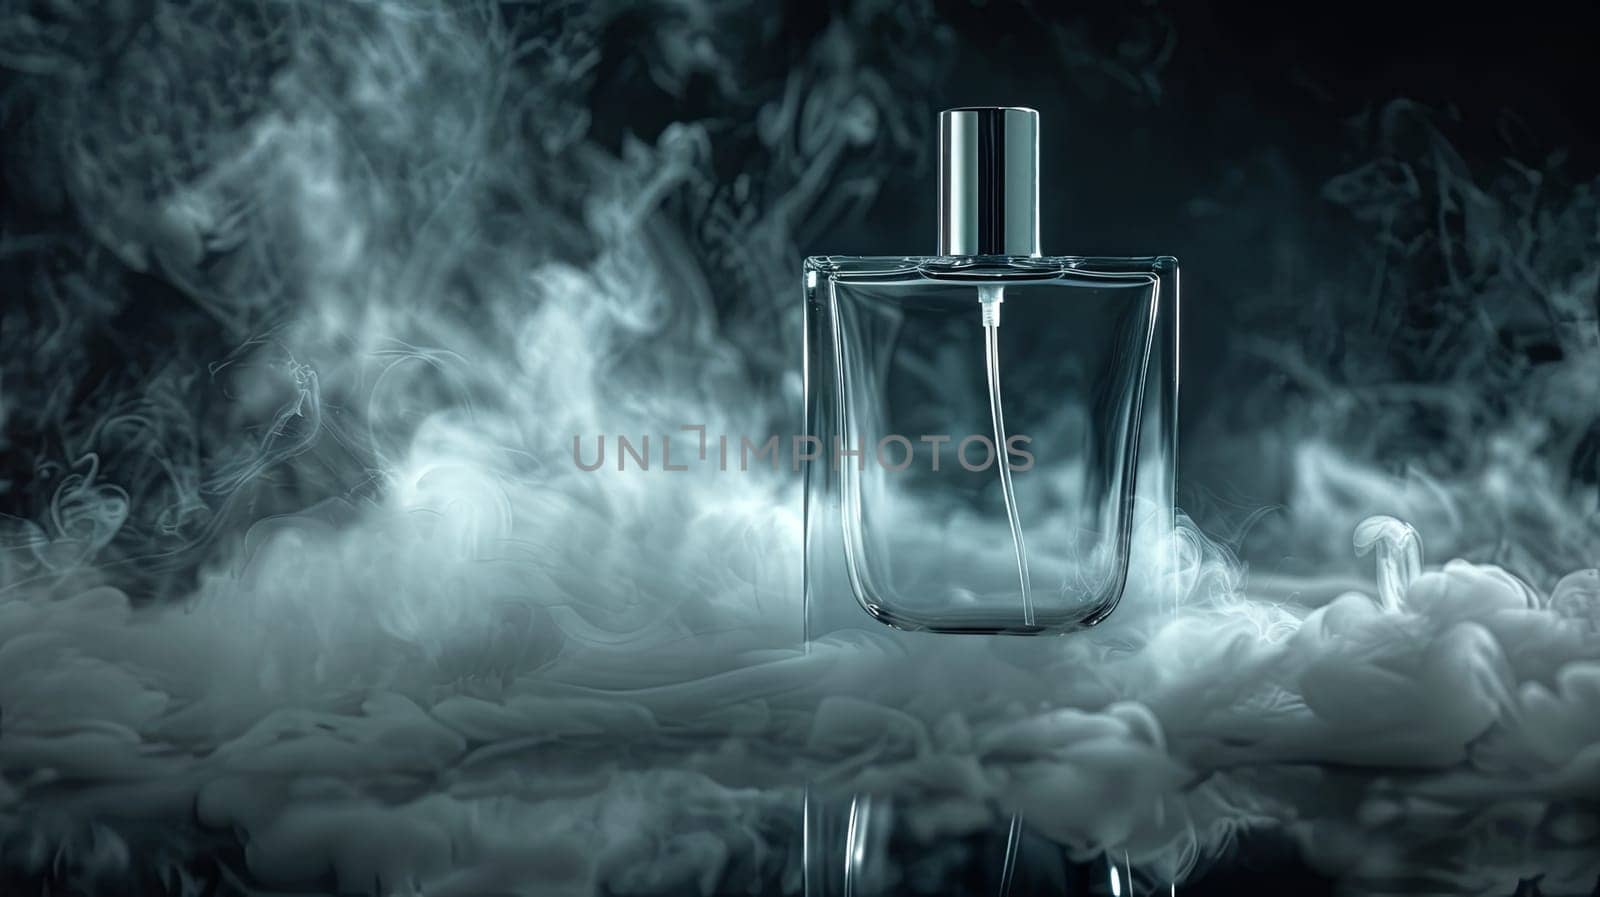 A close-up image of a glass perfume bottle with a silver cap, set against a dark background. White mist swirls around the bottle, creating a delicate and luxurious atmosphere.